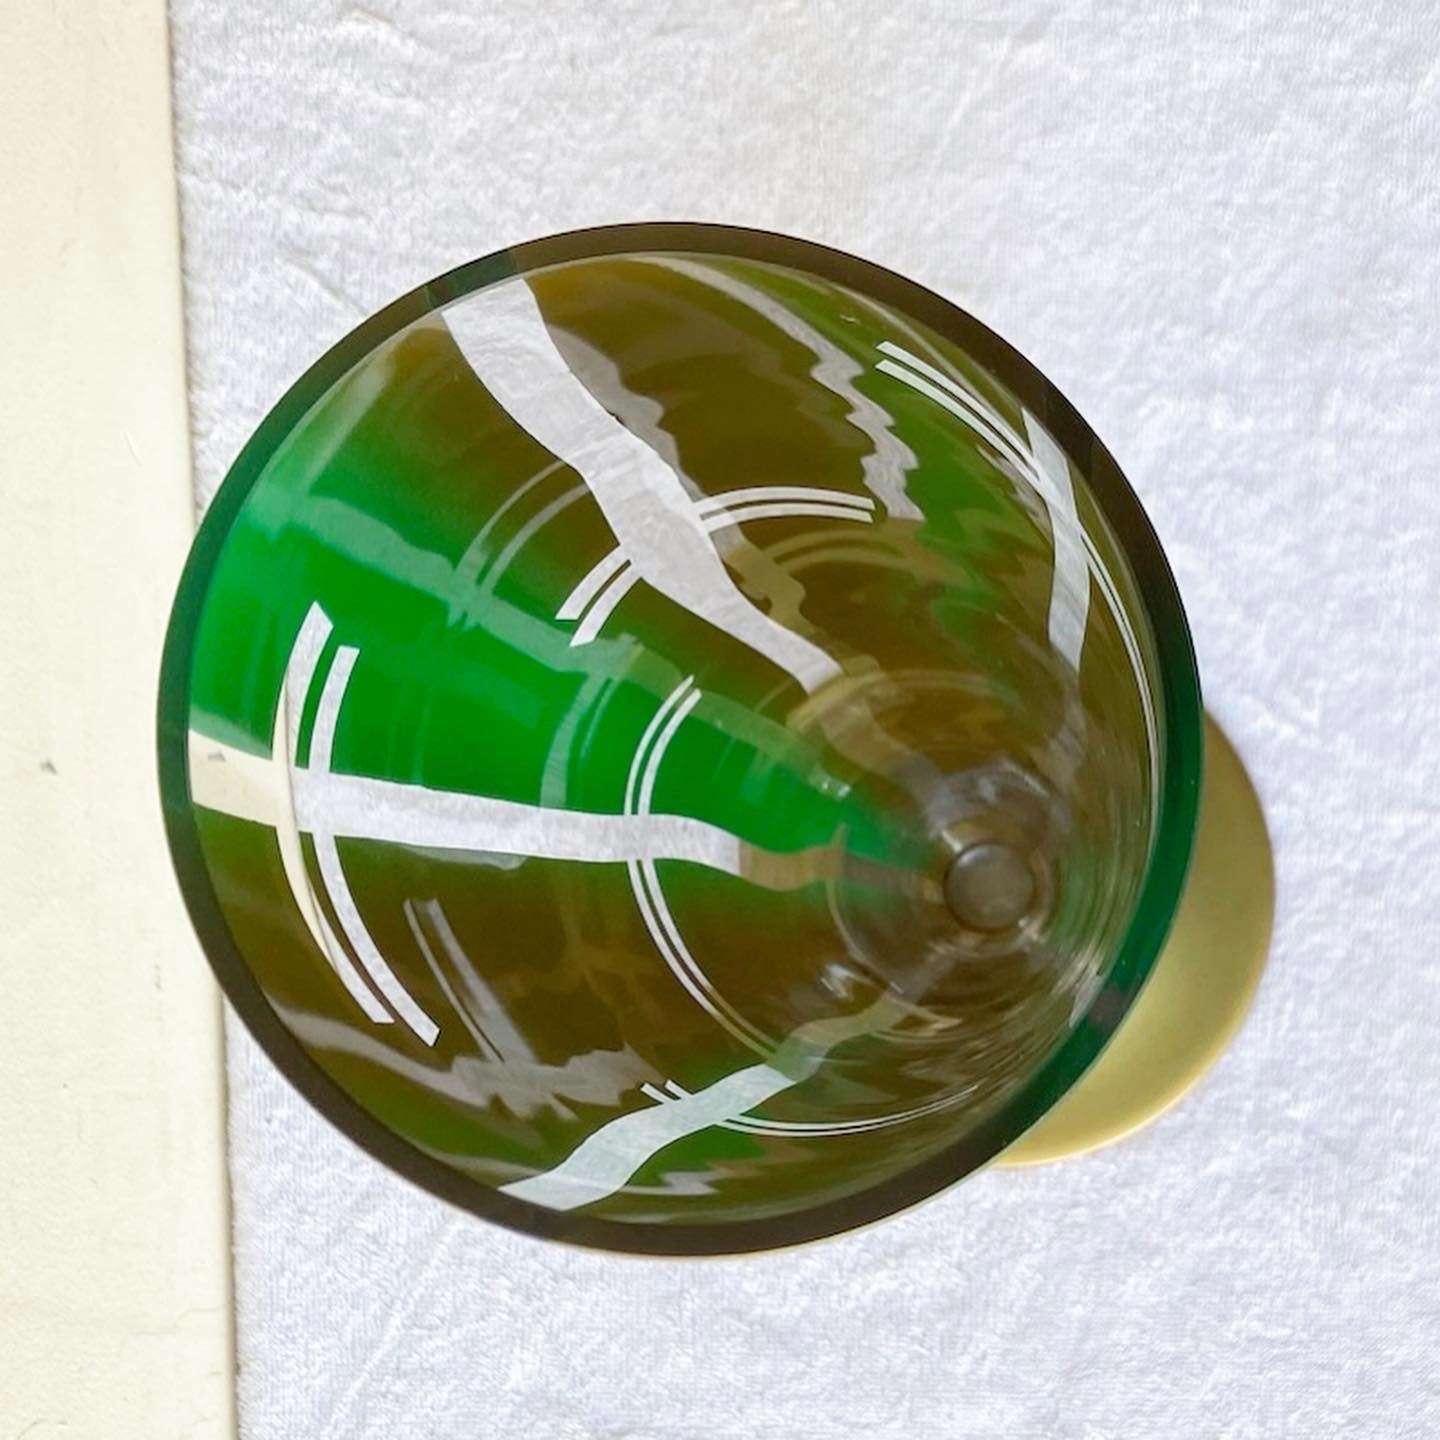 Wonderful vintage mid century modern glass vase. Features a painted green and gold finish.
